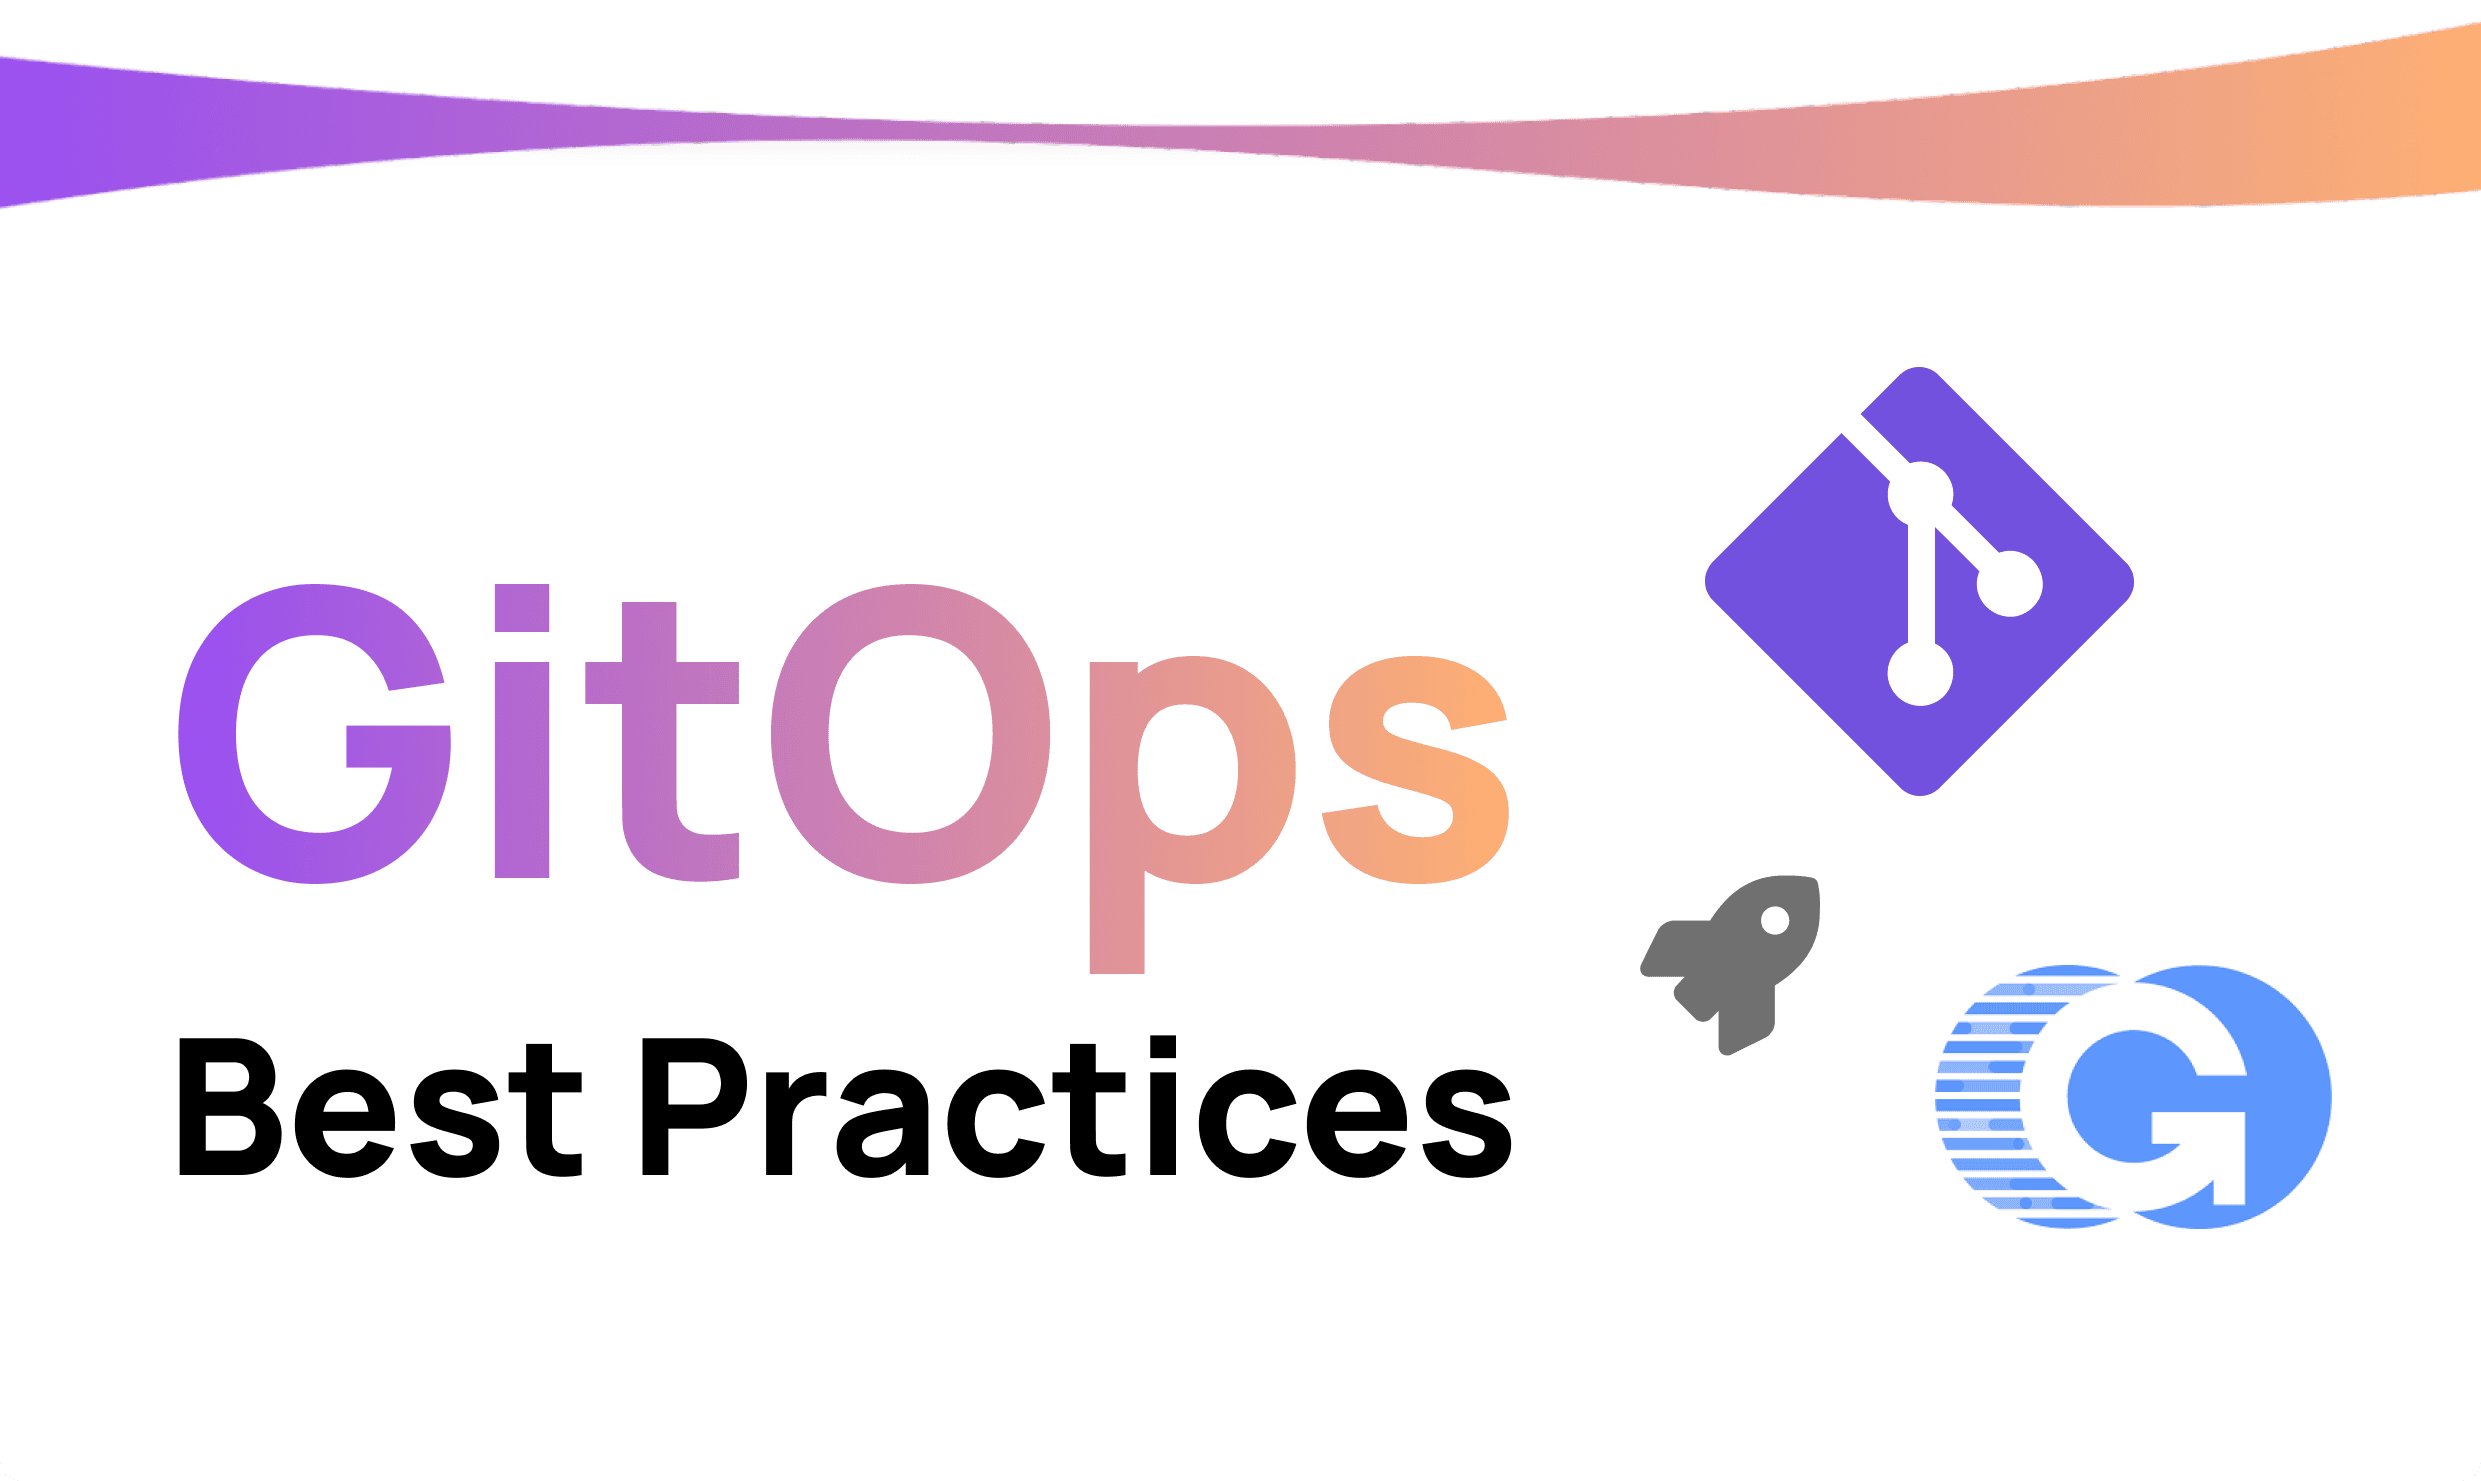 Adopt Gitops Today - Here’s Why and How.